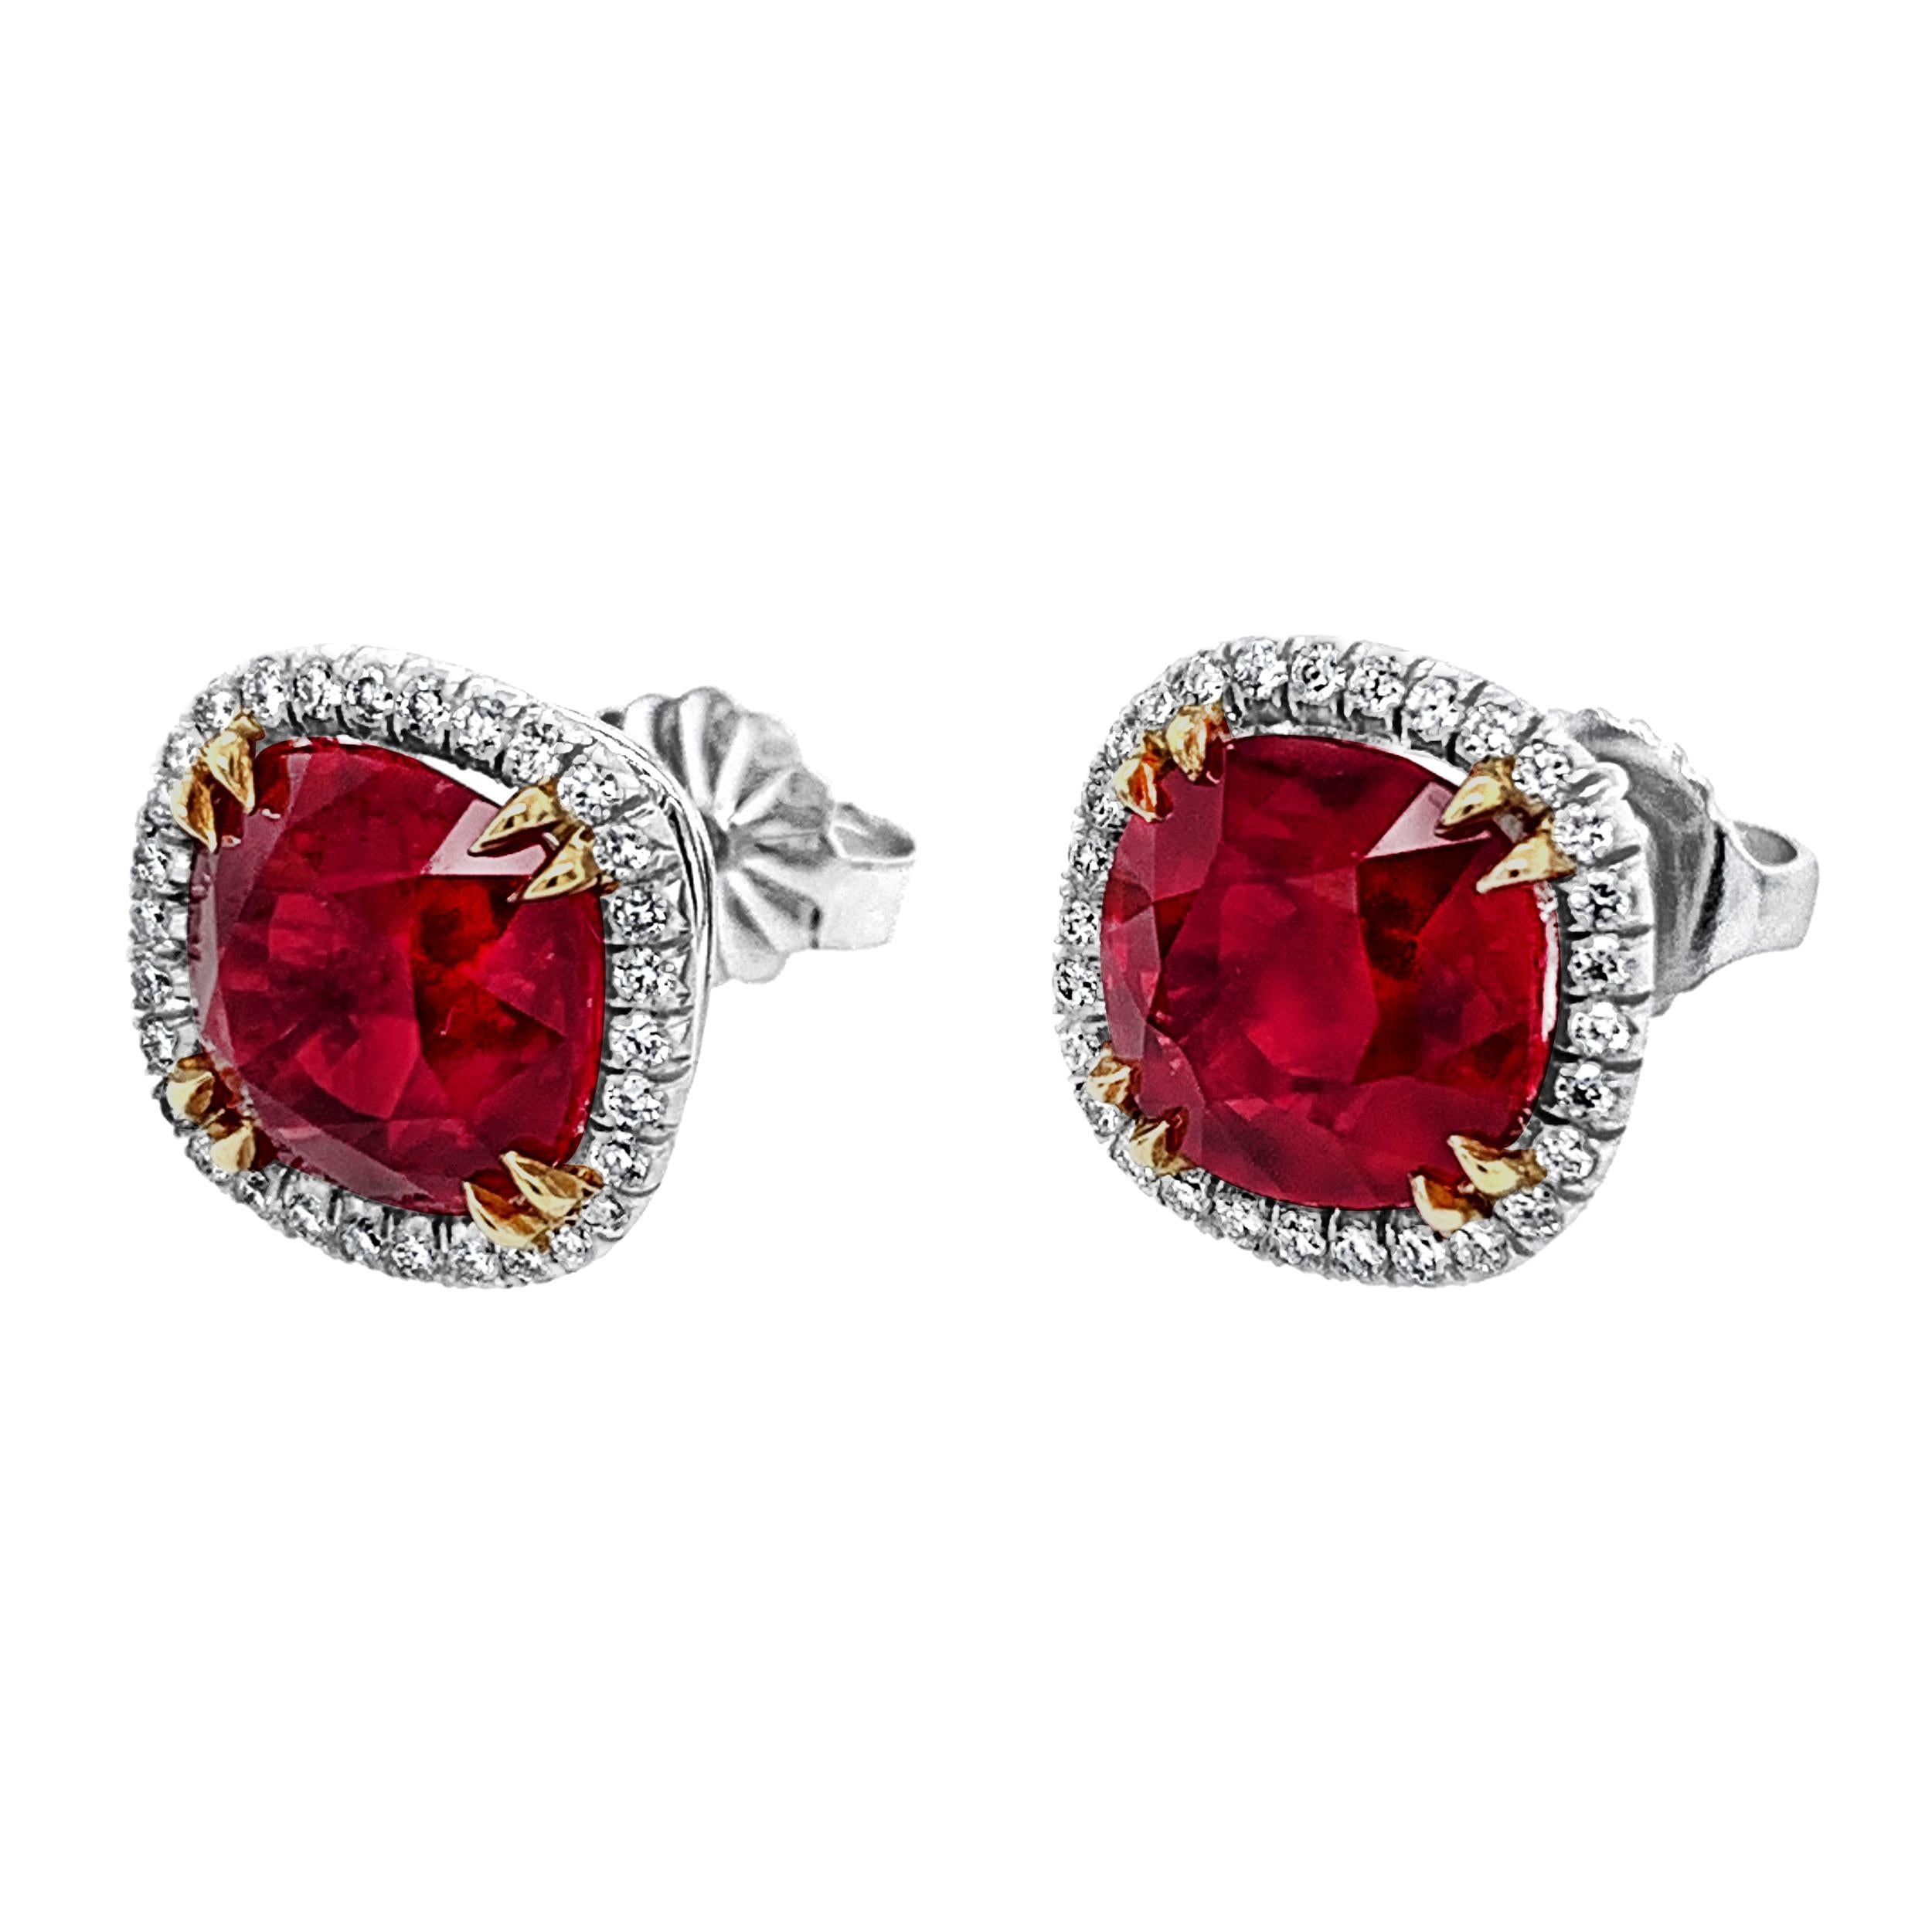 Cushion Cut 6.09 Carat 'total weight' Ruby Earrings with Diamond Halo For Sale